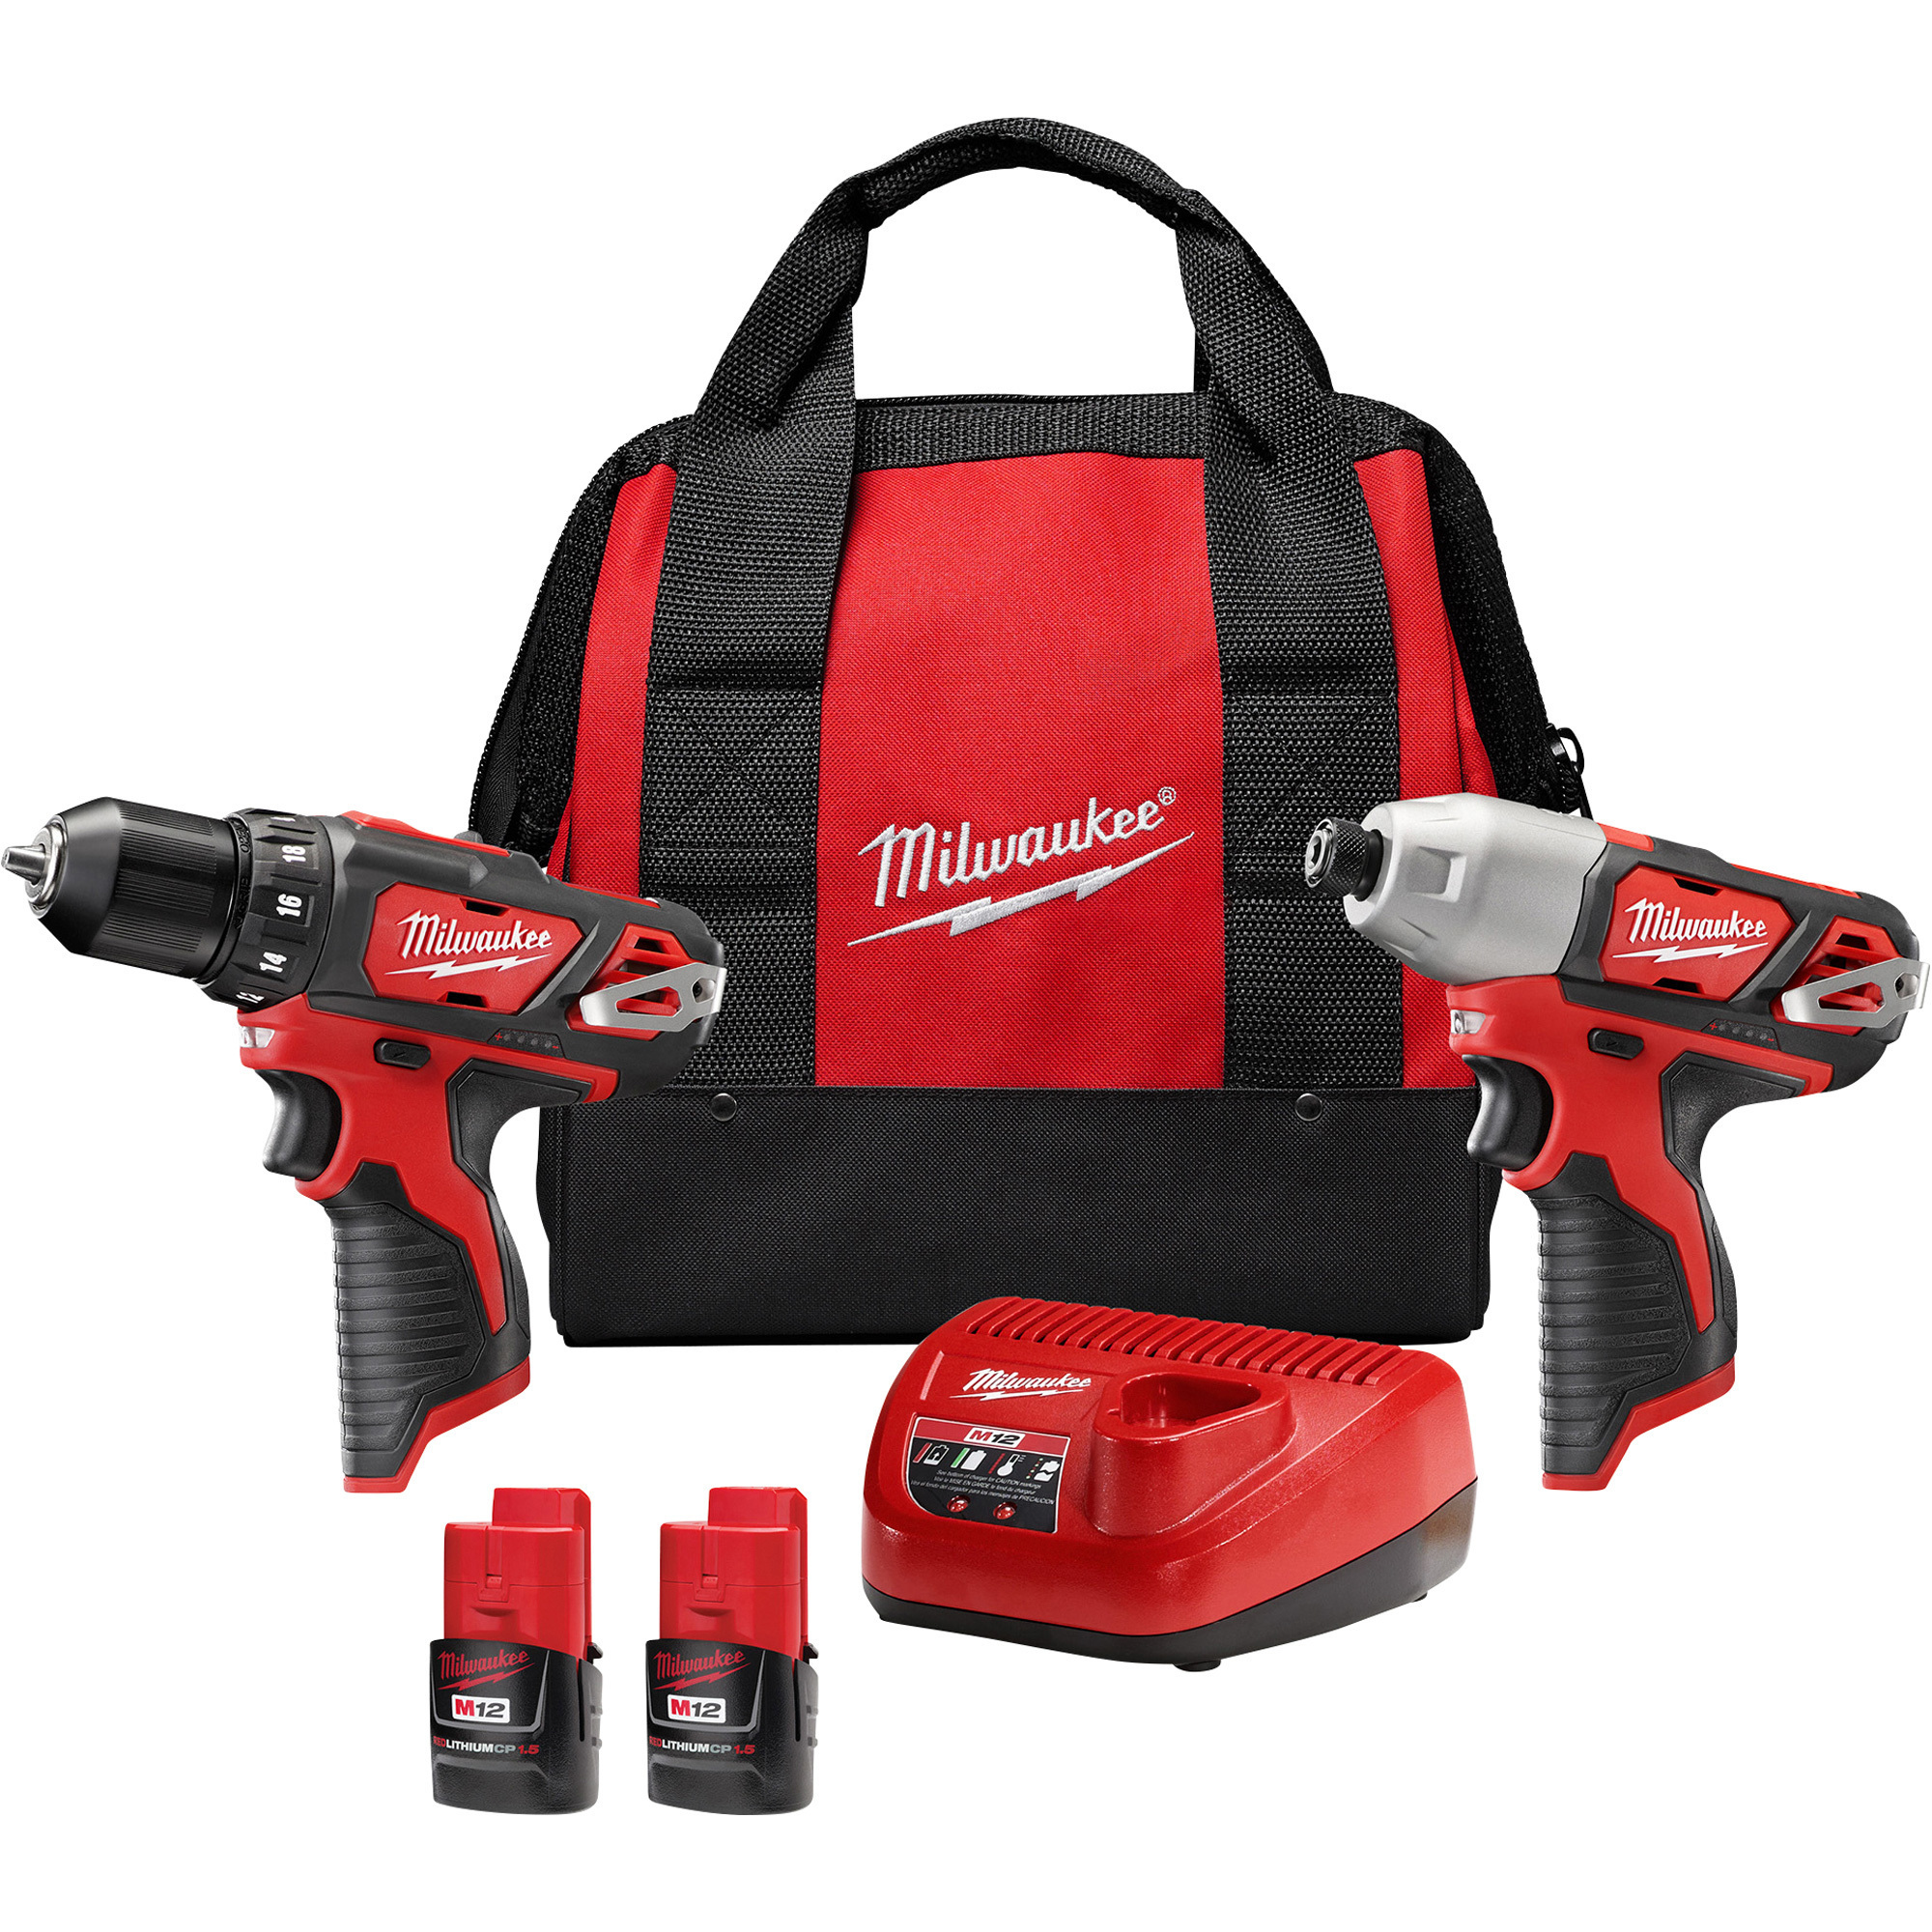 Milwaukee M12 Lithium-Ion Cordless Power Tool Set, 3/8Inch Drill and 1/4Inch Hex Impact Driver, 2 Batteries, Model 2494-22